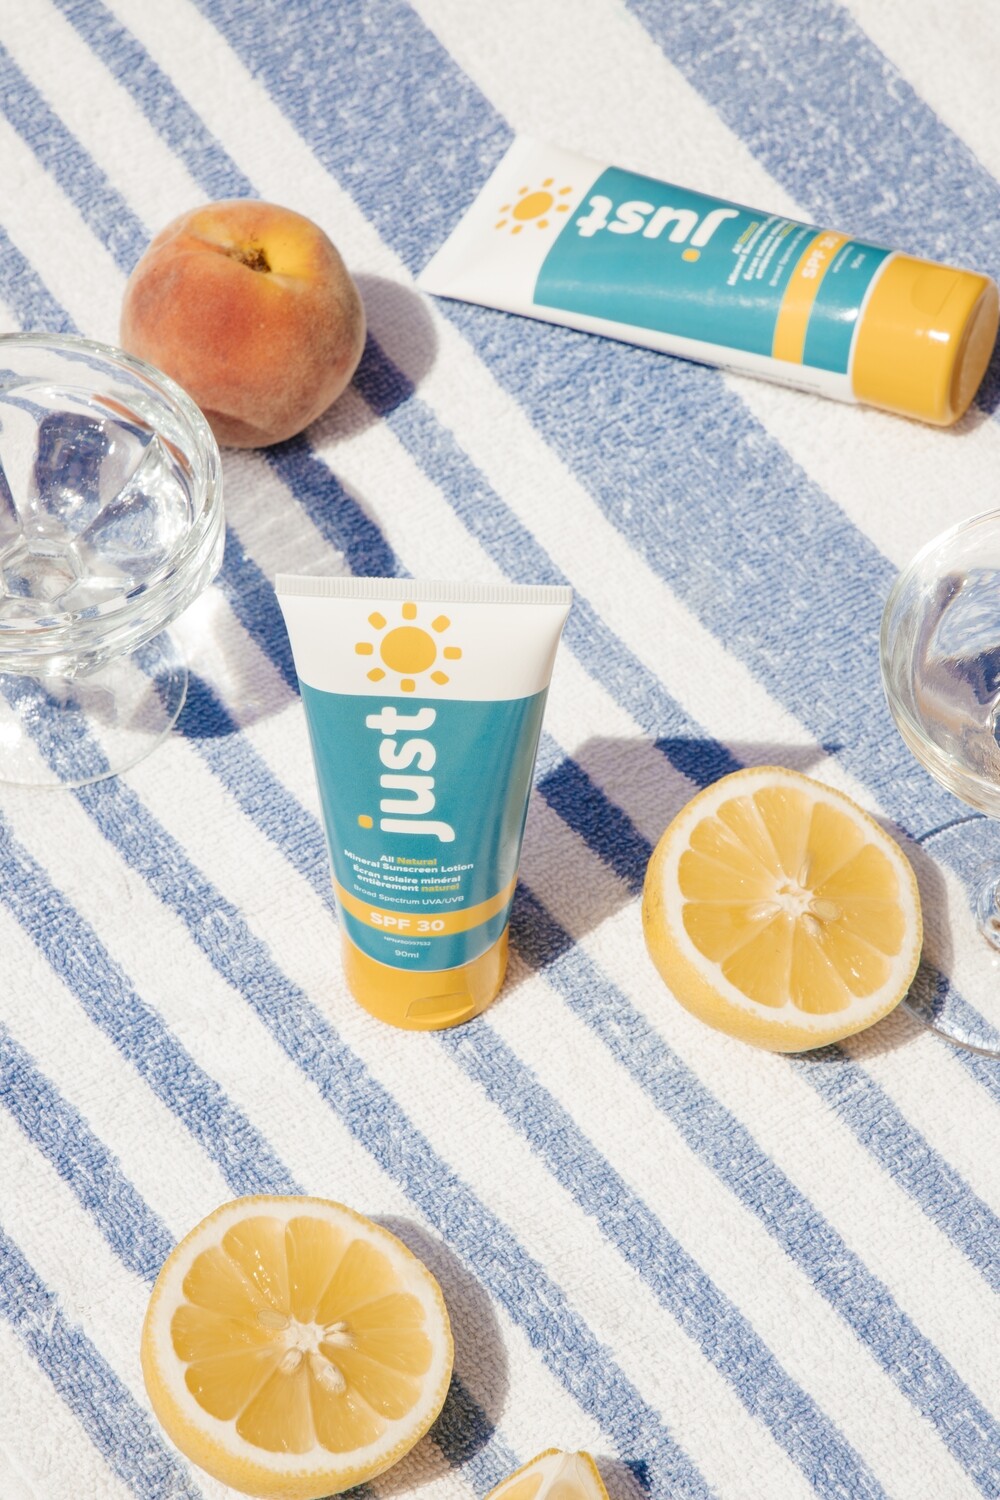 Just Sun - Mineral Sunscreen Lotion